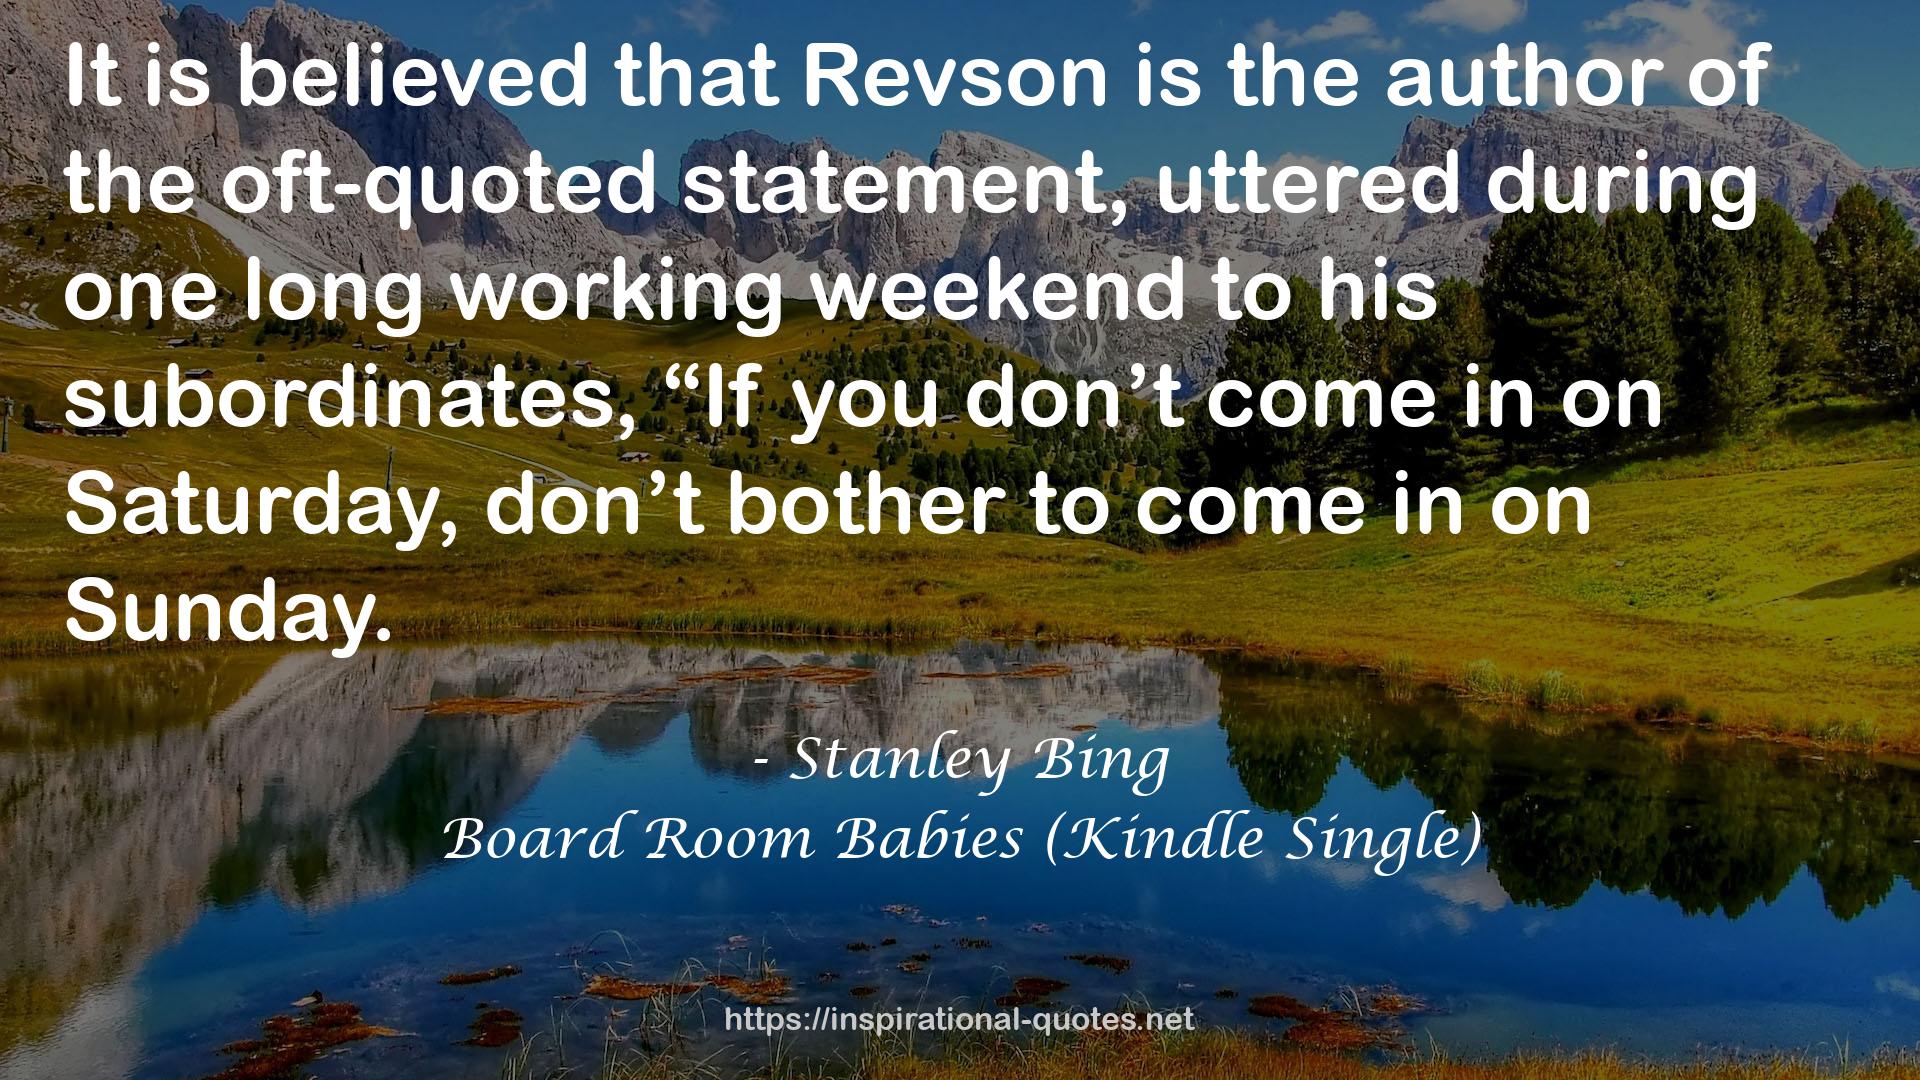 Board Room Babies (Kindle Single) QUOTES